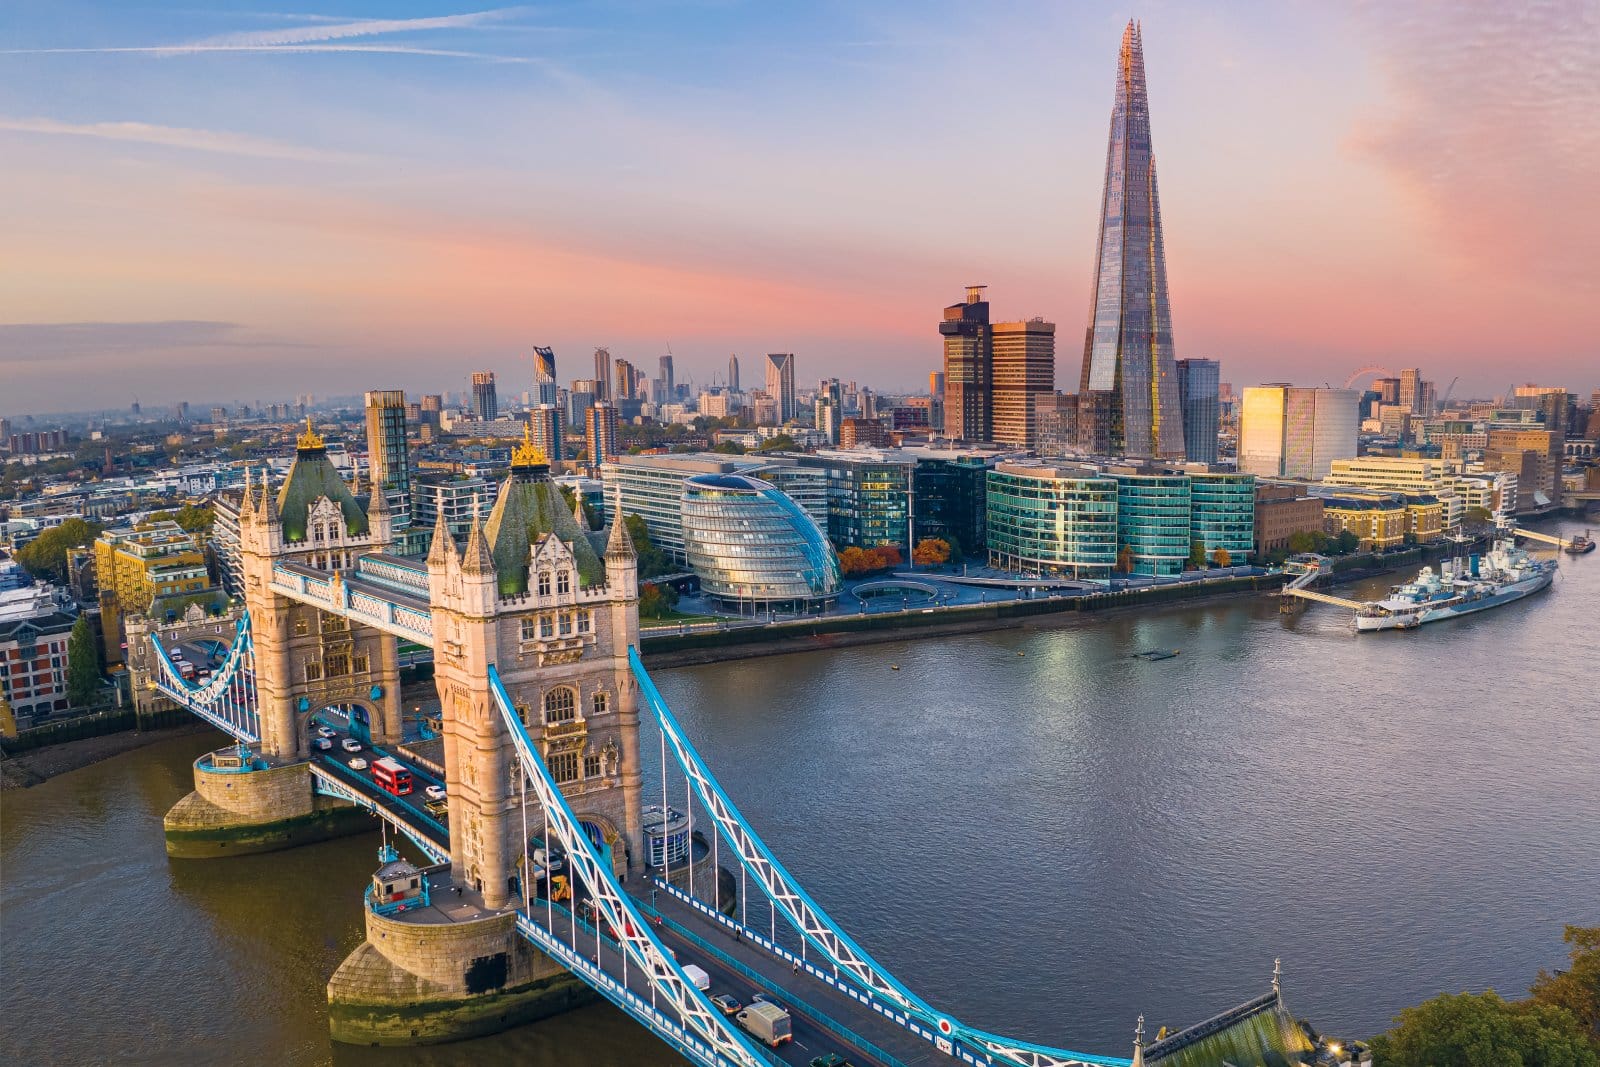 <p class="wp-caption-text">Image Credit: Shutterstock / Marek Masik</p>  <p>The UK’s rich history, from the castles of Scotland to the streets of London, combined with its influential culture and literature, makes it endlessly fascinating. There’s always something new to discover in the UK.</p>